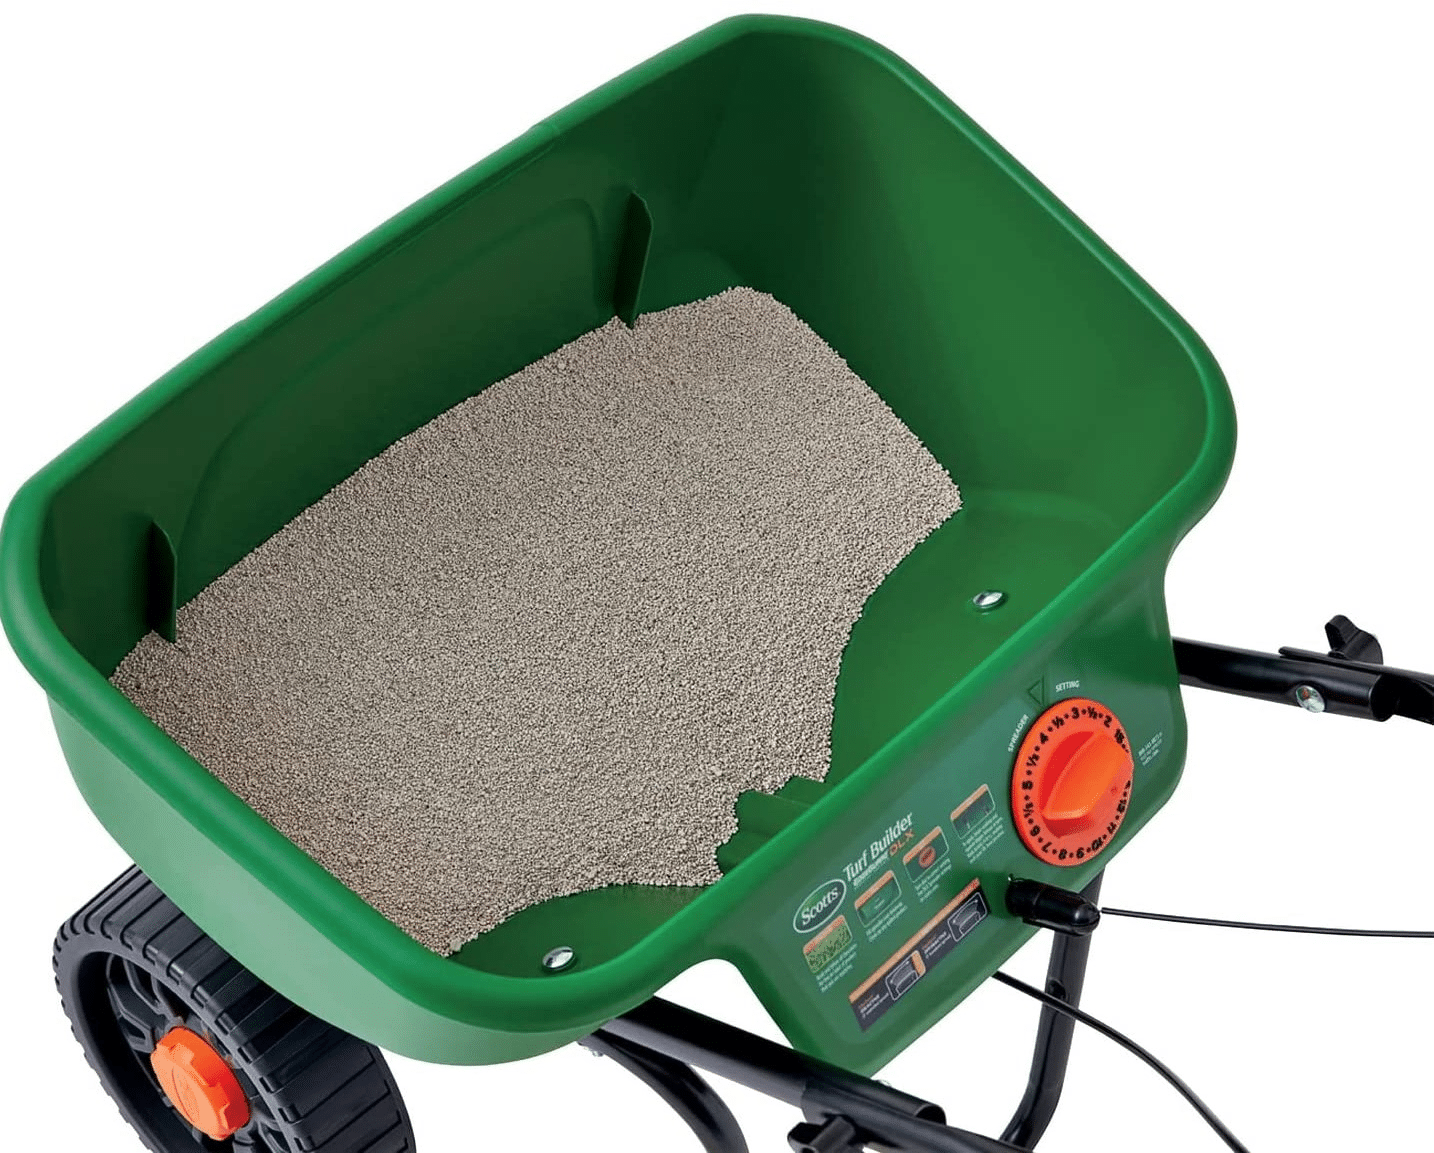 A broadcast spreader with a hopper capacity and material compatibility